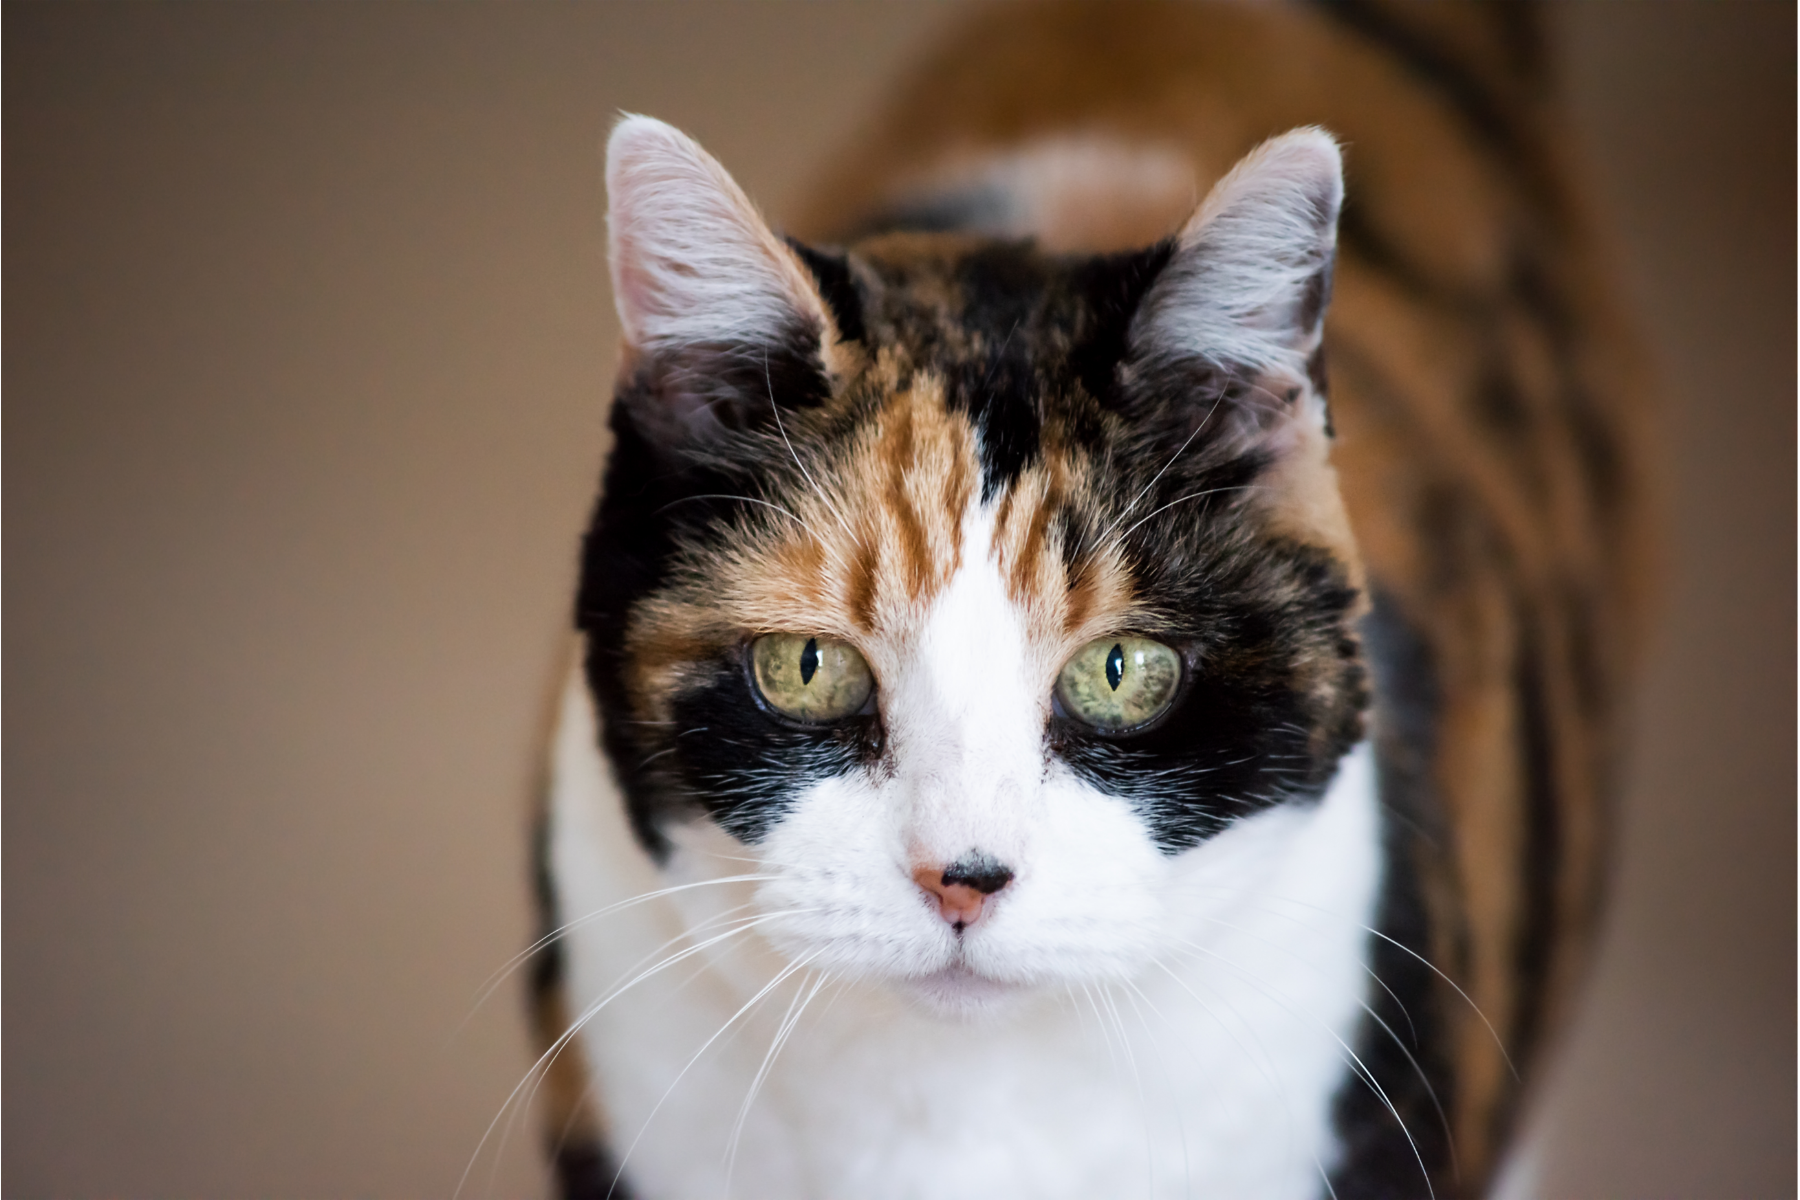 3 Tips to Care for a Senior Cat